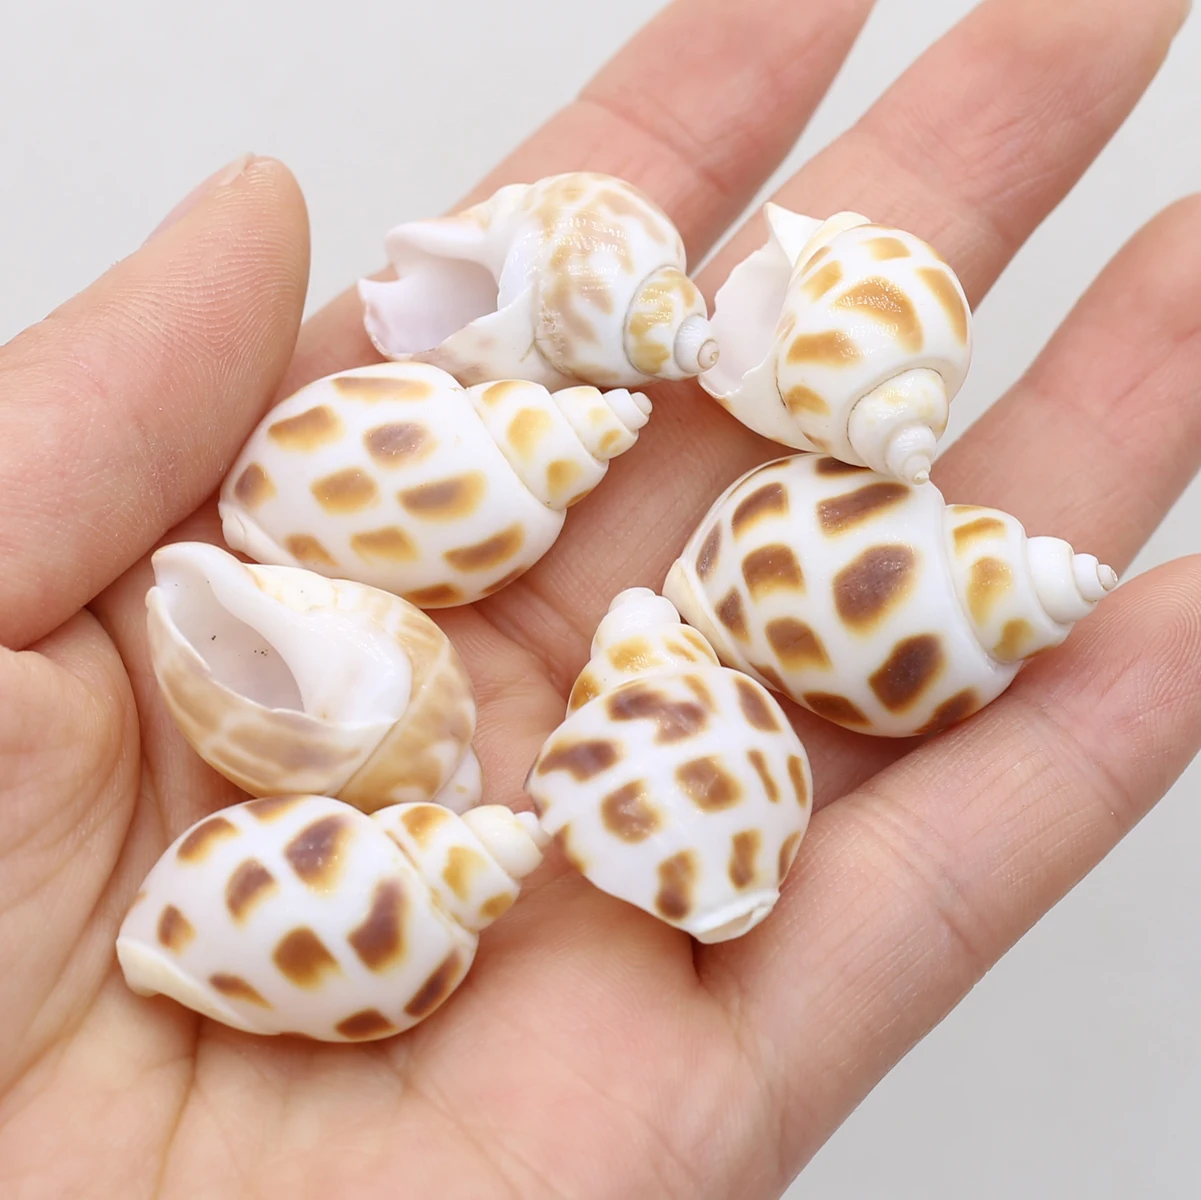 About 40Pcs Wholesale Lot Natural Yellow Conch Shell Shellfish Seashell for Fish Tank Landscape Aquarium Home Decoration Crafts